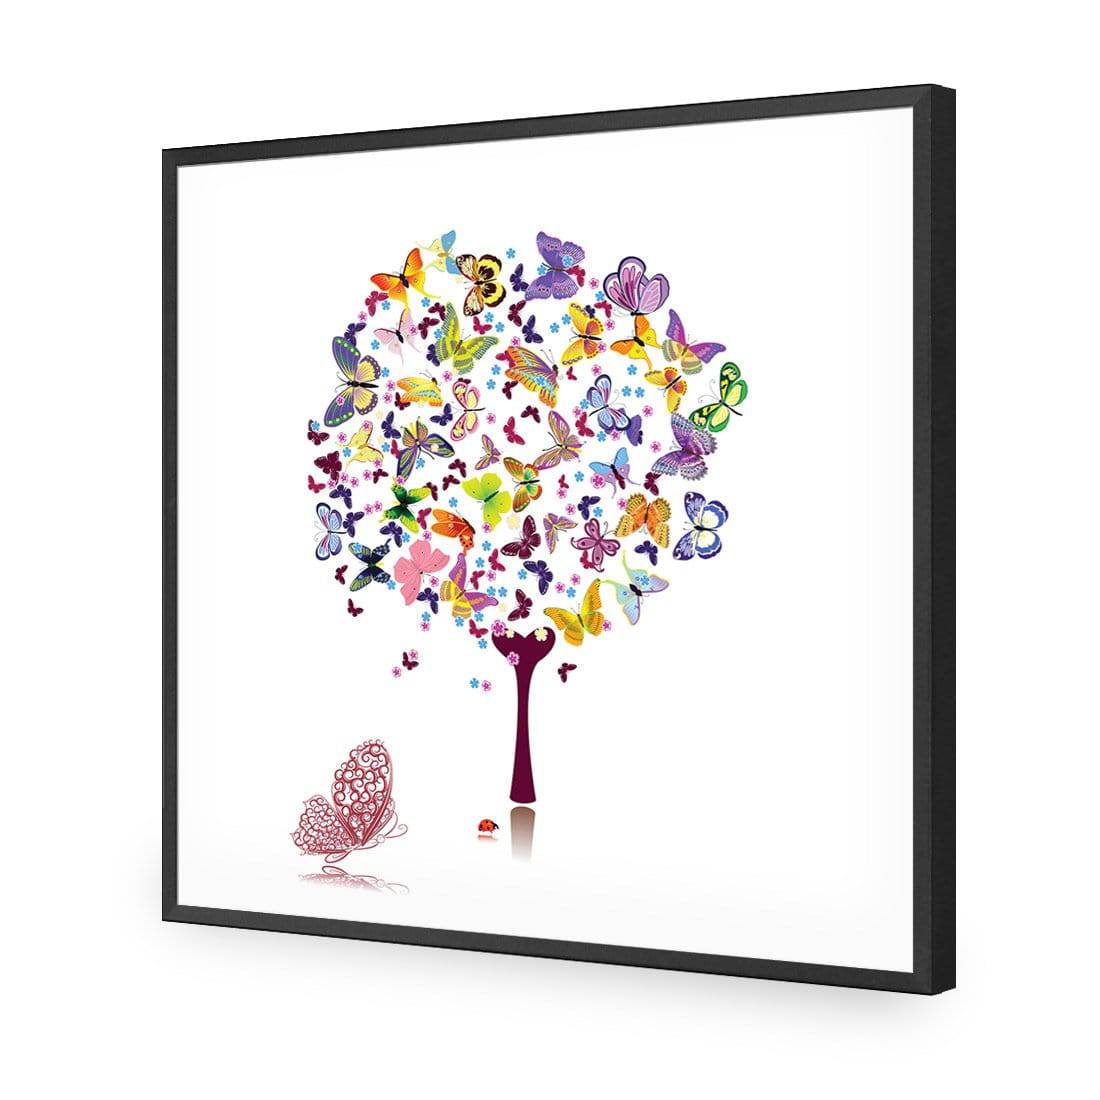 Day Dream Tree, Square-Acrylic-Wall Art Design-Without Border-Acrylic - Black Frame-37x37cm-Wall Art Designs